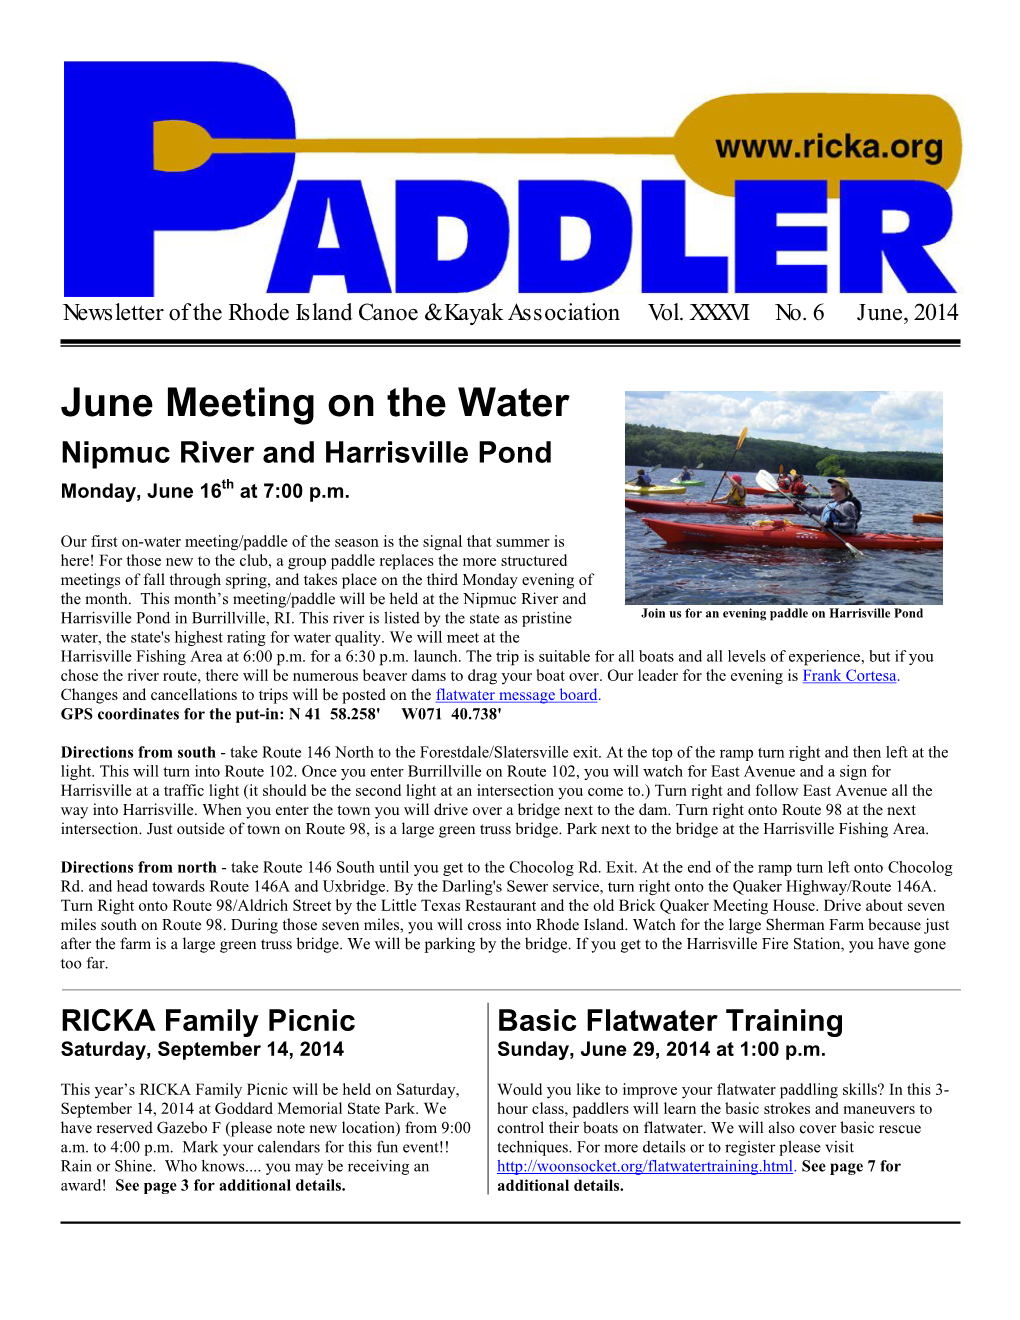 June Meeting on the Water Nipmuc River and Harrisville Pond Monday, June 16Th at 7:00 P.M